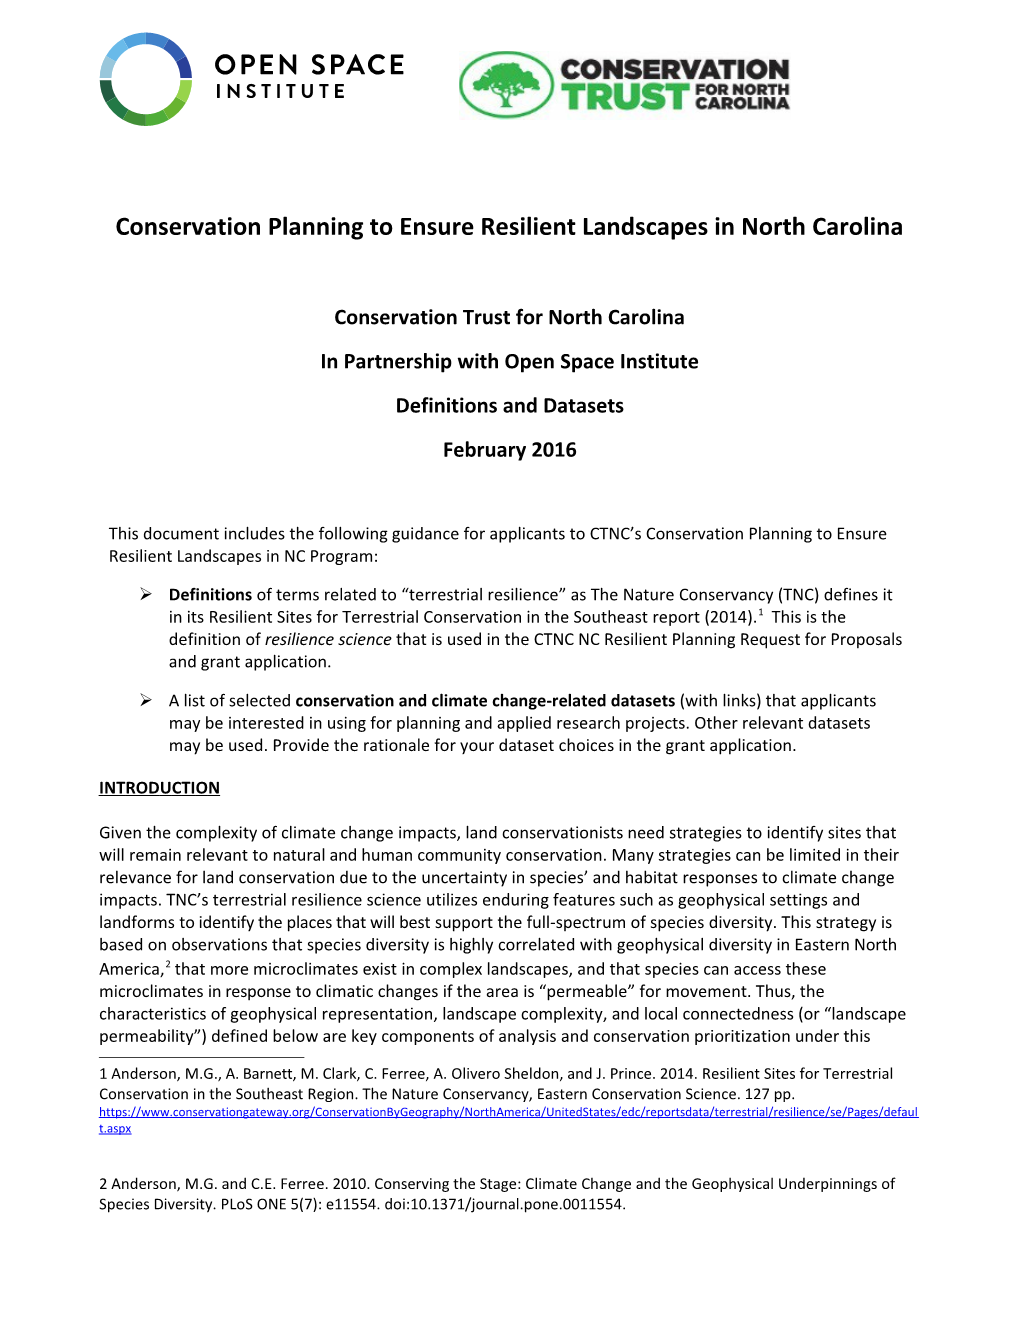 Conservation Planning to Ensure Resilient Landscapes in North Carolina